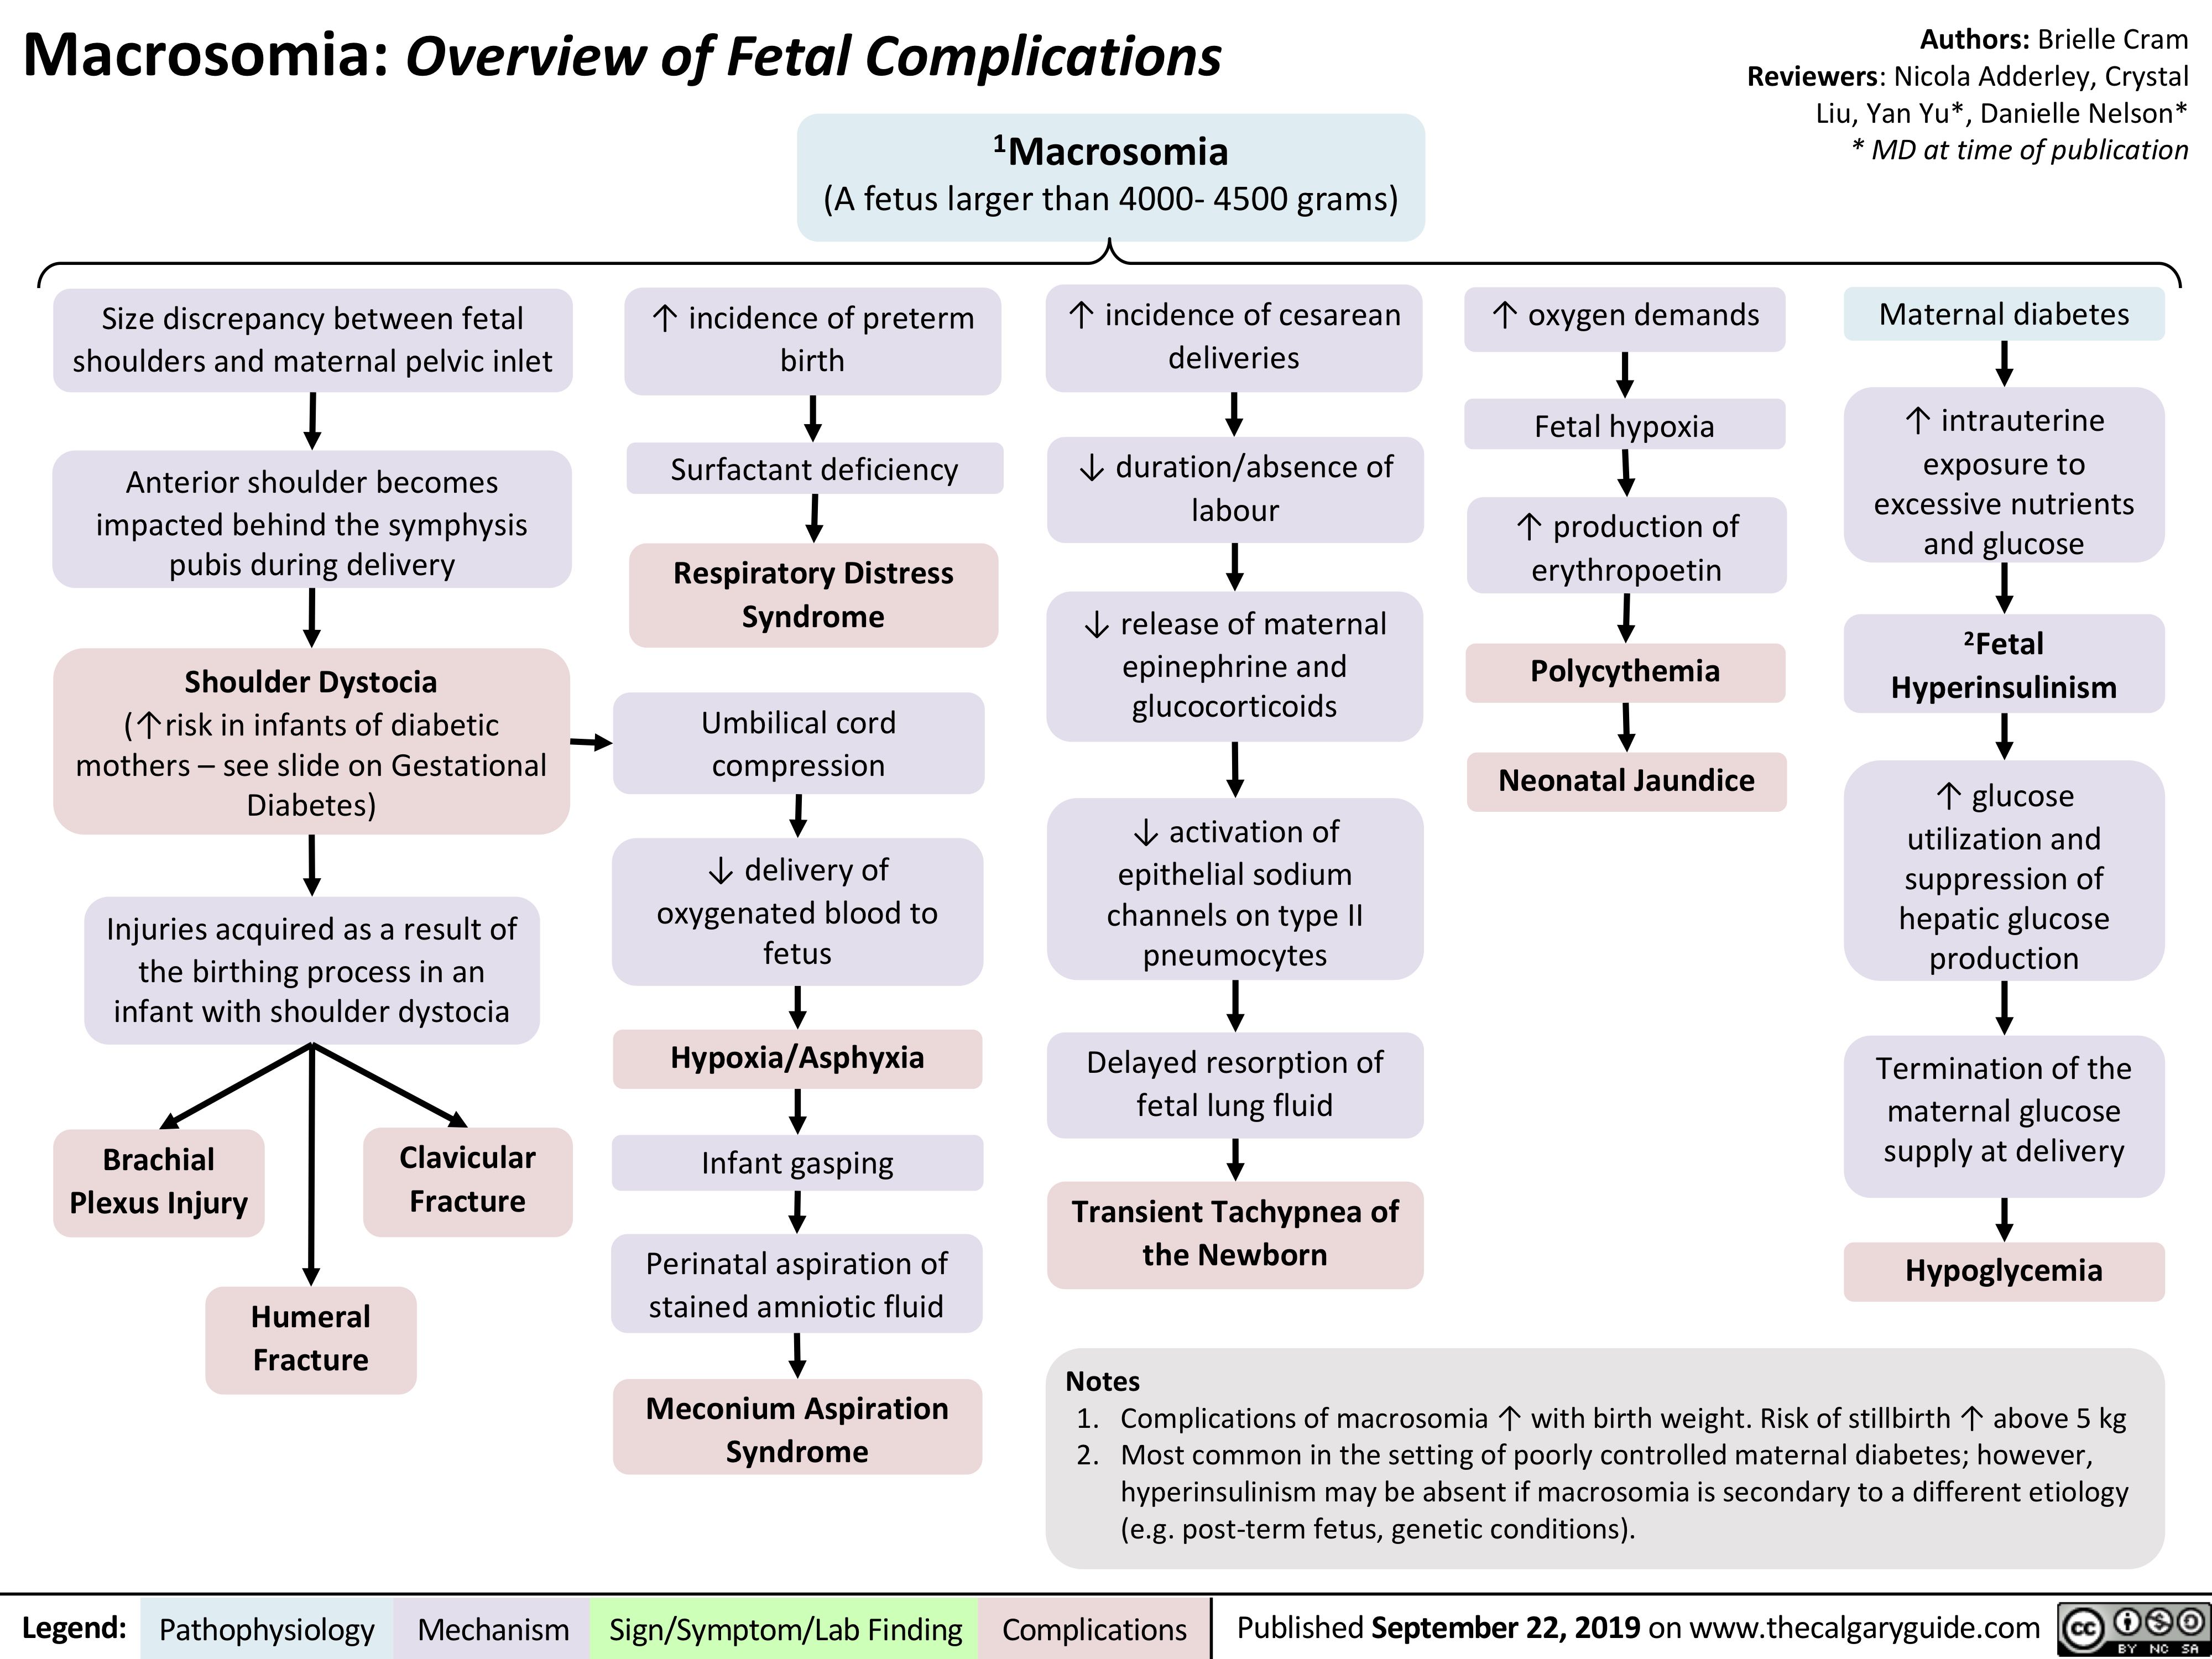 Macrosomia: Overview of Fetal Complications 1Macrosomia
Authors: Brielle Cram Reviewers: Nicola Adderley, Crystal Liu, Yan Yu*, Danielle Nelson* * MD at time of publication
 (A fetus larger than 4000- 4500 grams)
      Size discrepancy between fetal shoulders and maternal pelvic inlet
Anterior shoulder becomes impacted behind the symphysis pubis during delivery
Shoulder Dystocia
(↑risk in infants of diabetic mothers – see slide on Gestational Diabetes)
Injuries acquired as a result of the birthing process in an infant with shoulder dystocia
↑ incidence of preterm birth
Surfactant deficiency
Respiratory Distress Syndrome
Umbilical cord compression
↓ delivery of oxygenated blood to fetus
Hypoxia/Asphyxia
Infant gasping
Perinatal aspiration of stained amniotic fluid
Meconium Aspiration Syndrome
↑ incidence of cesarean deliveries
↓ duration/absence of labour
↓ release of maternal epinephrine and glucocorticoids
↓ activation of epithelial sodium channels on type II pneumocytes
Delayed resorption of fetal lung fluid
Transient Tachypnea of the Newborn
Notes
↑ oxygen demands
Fetal hypoxia
↑ production of erythropoetin
Polycythemia Neonatal Jaundice
Maternal diabetes
↑ intrauterine exposure to
excessive nutrients and glucose
2Fetal Hyperinsulinism
↑ glucose utilization and suppression of hepatic glucose production
Termination of the maternal glucose supply at delivery
Hypoglycemia
                                               Brachial Plexus Injury
Clavicular Fracture
       Humeral Fracture
   1. Complications of macrosomia ↑ with birth weight. Risk of stillbirth ↑ above 5 kg 2. Most common in the setting of poorly controlled maternal diabetes; however,
hyperinsulinism may be absent if macrosomia is secondary to a different etiology (e.g. post-term fetus, genetic conditions).
 Legend:
 Pathophysiology
Mechanism
Sign/Symptom/Lab Finding
  Complications
 Published September 22, 2019 on www.thecalgaryguide.com
   